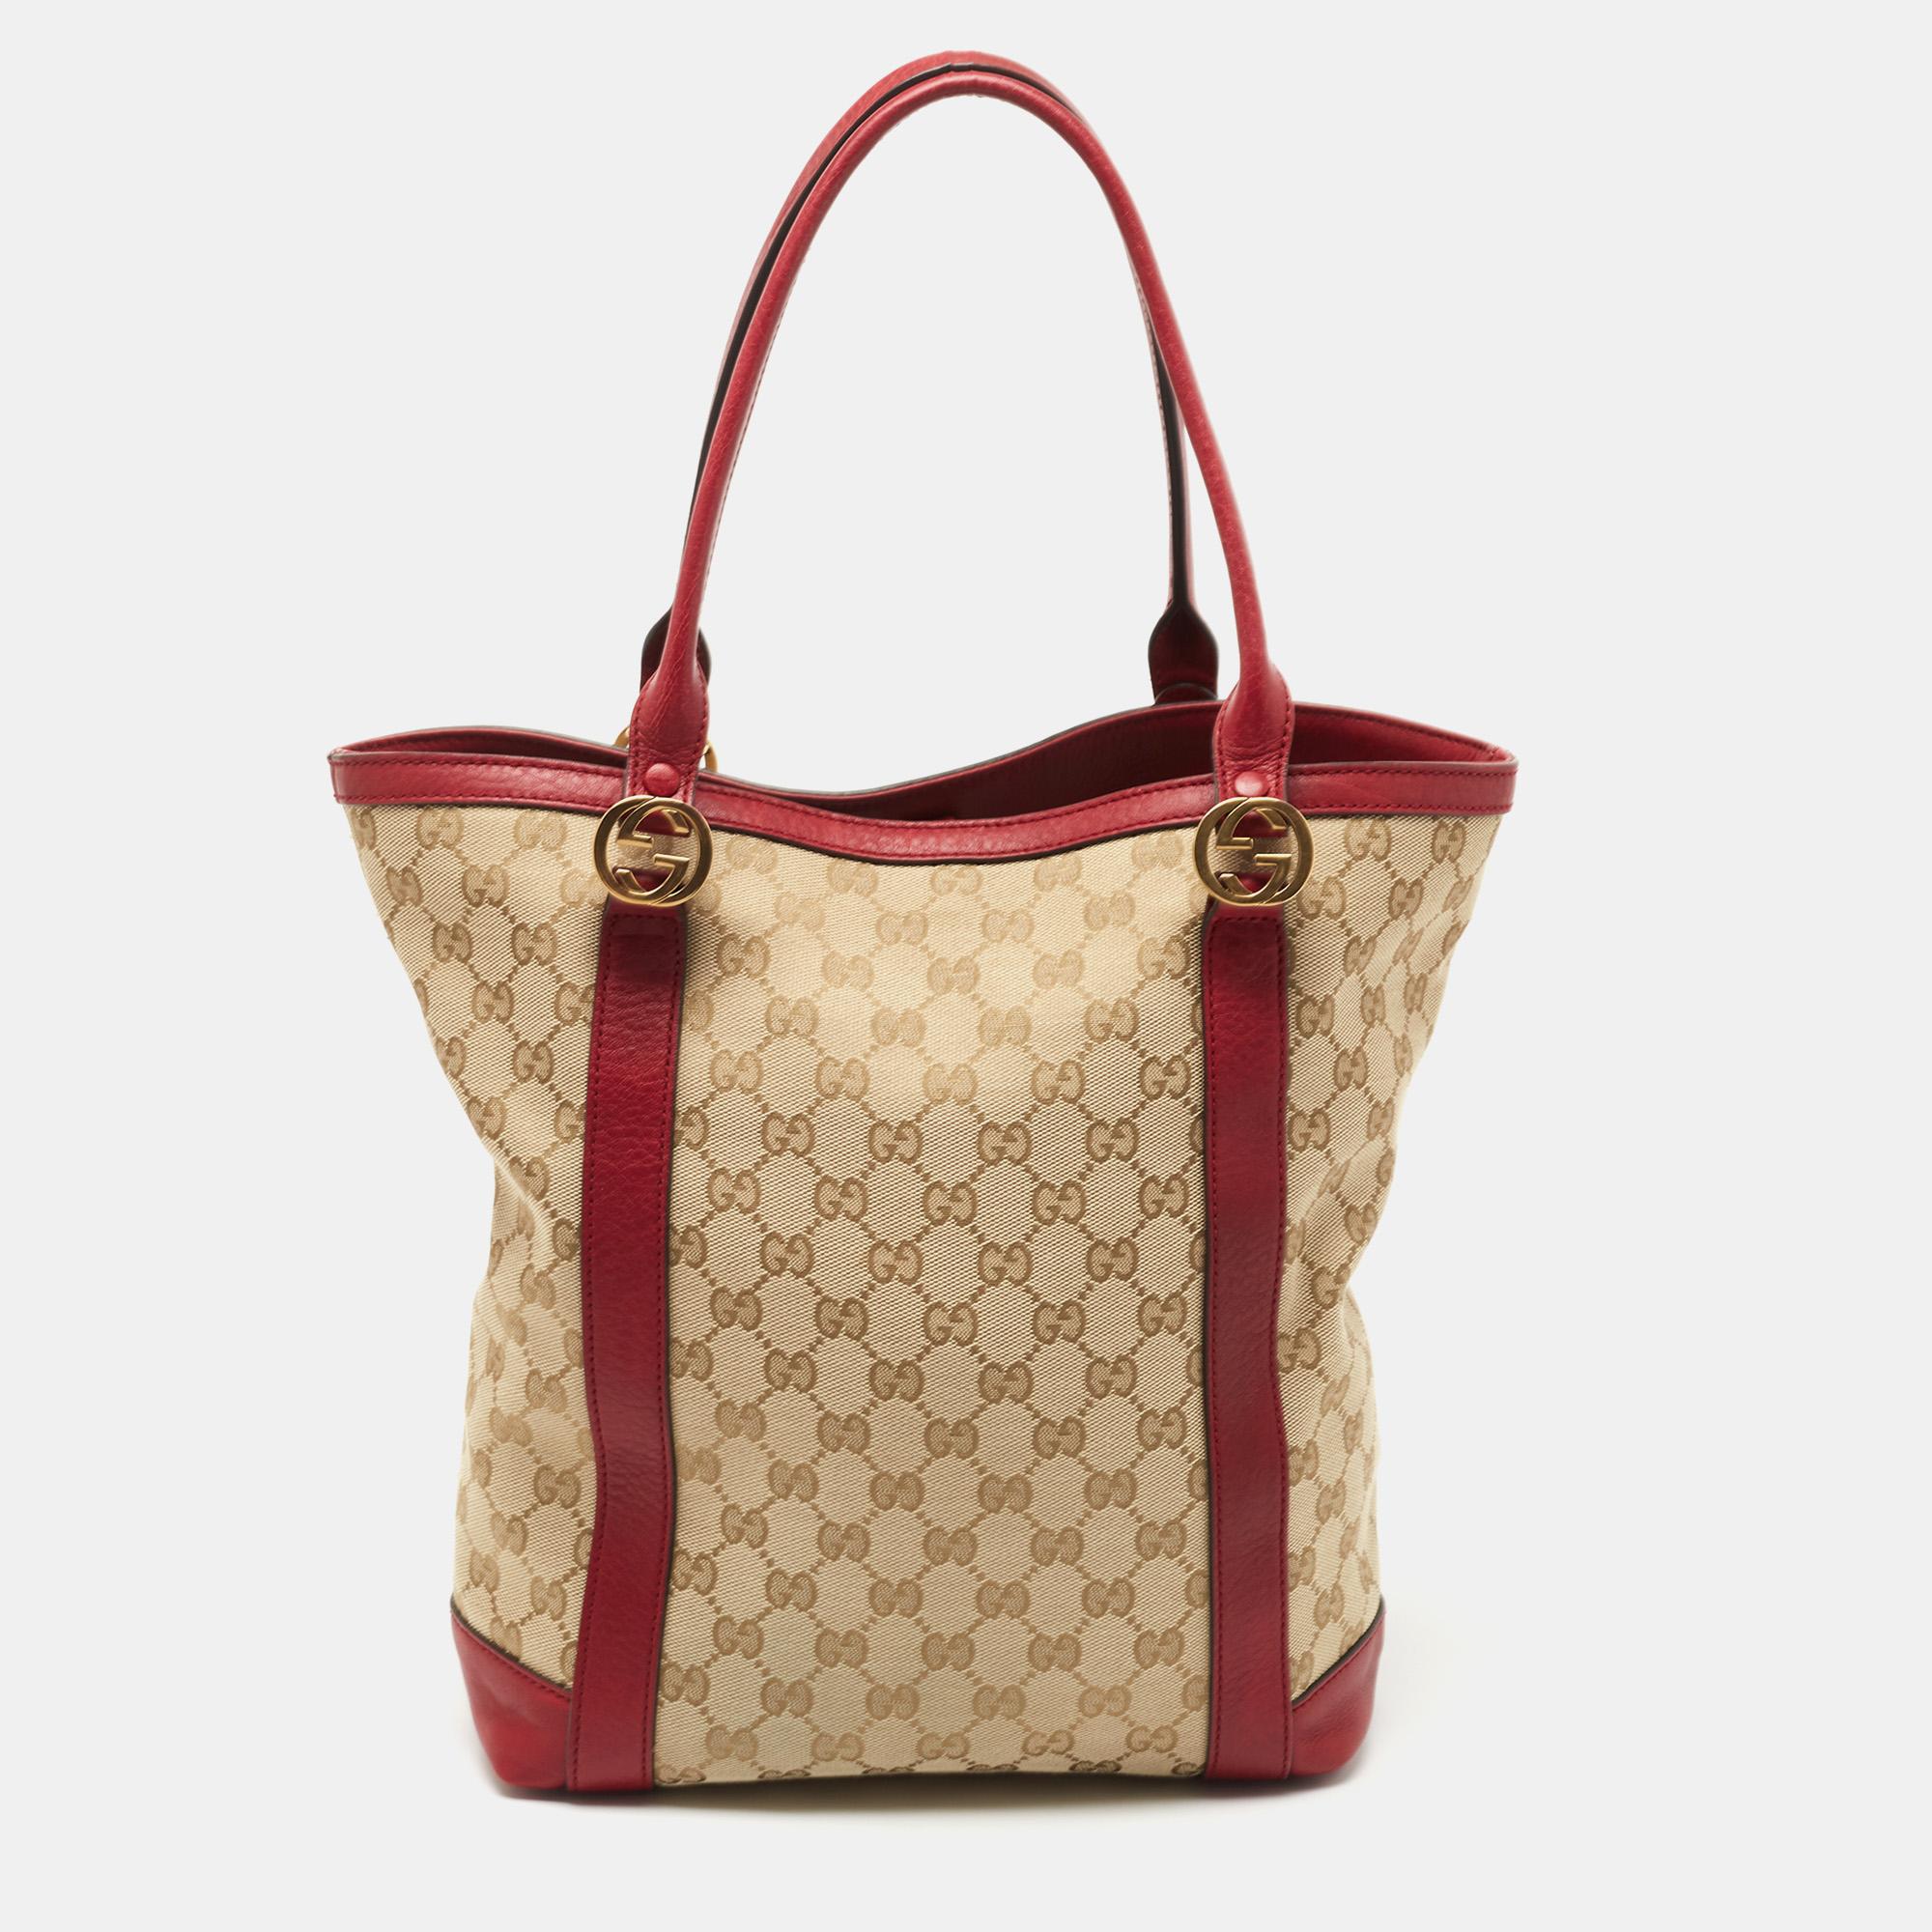 The simple silhouette and the use of GG canvas and leather for the exterior bring out the appeal of this Gucci tote. It features dual handles, gold-tone hardware, and a lined interior.

Includes: Original Dustbag

